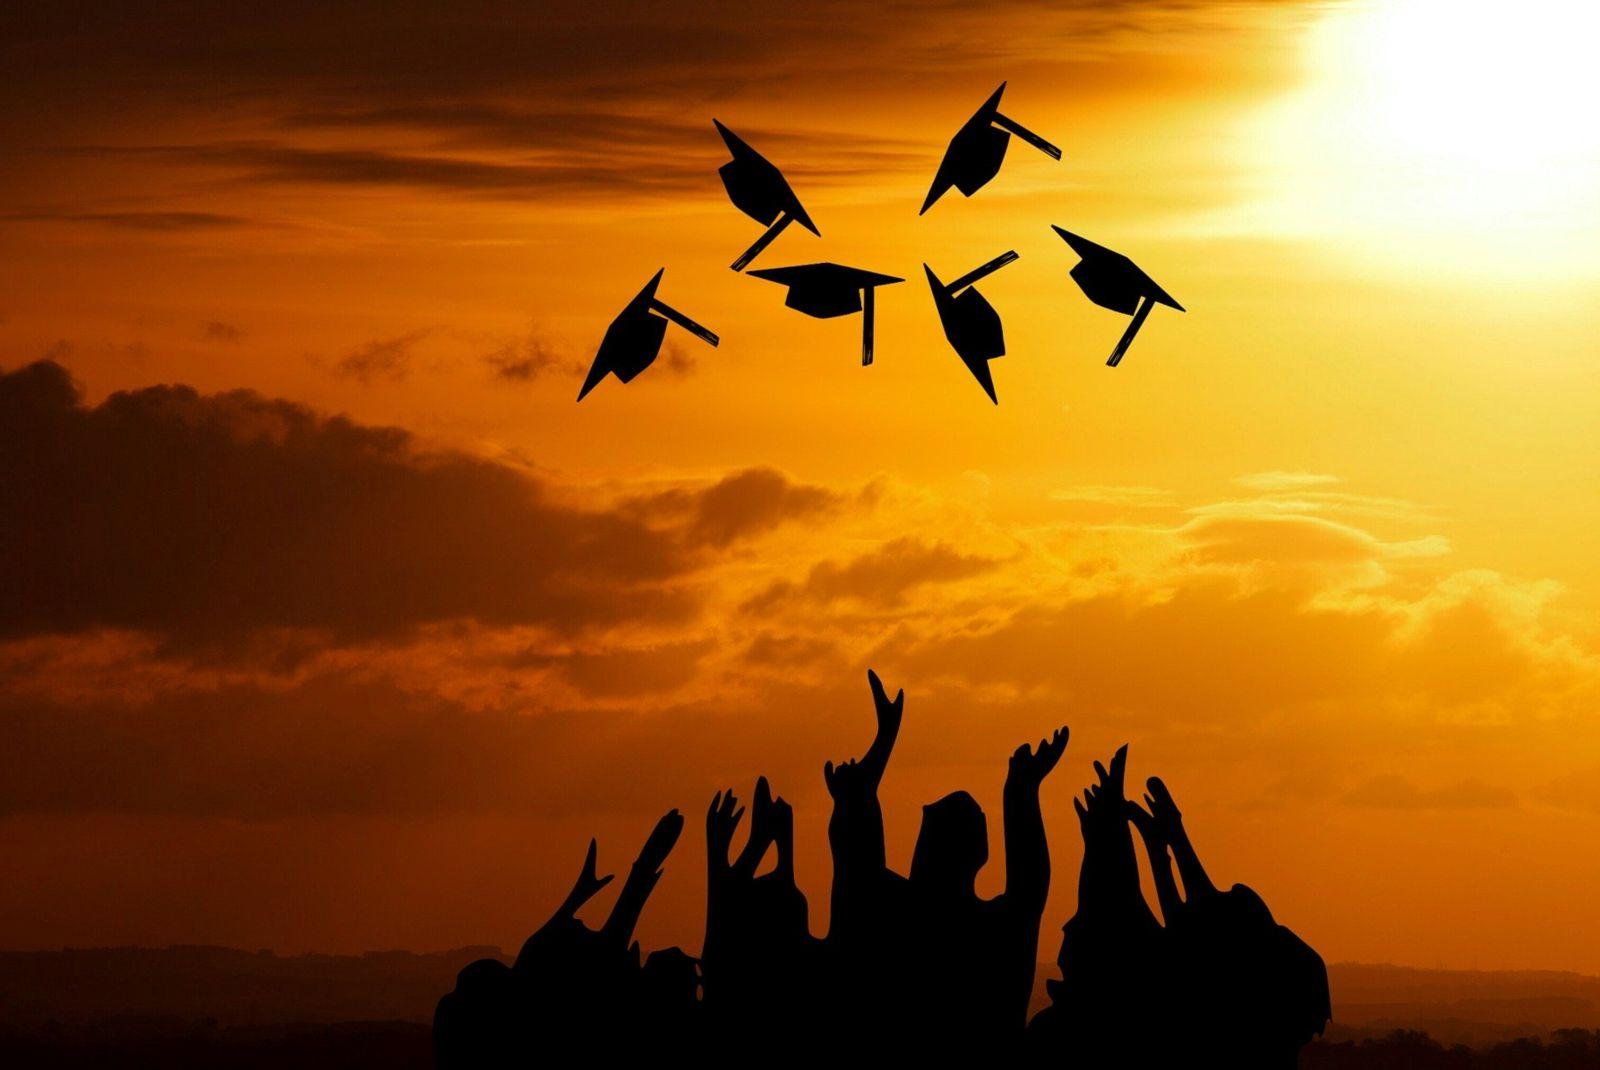 A forest green, hyperlinked, 按钮标记为白色的文凭, bolded, underlined text with an image of six graduates stand silhouetted in black against a sunrise/sunset with a golden-orange, cloudy sky while throwing their graduation caps in the air.